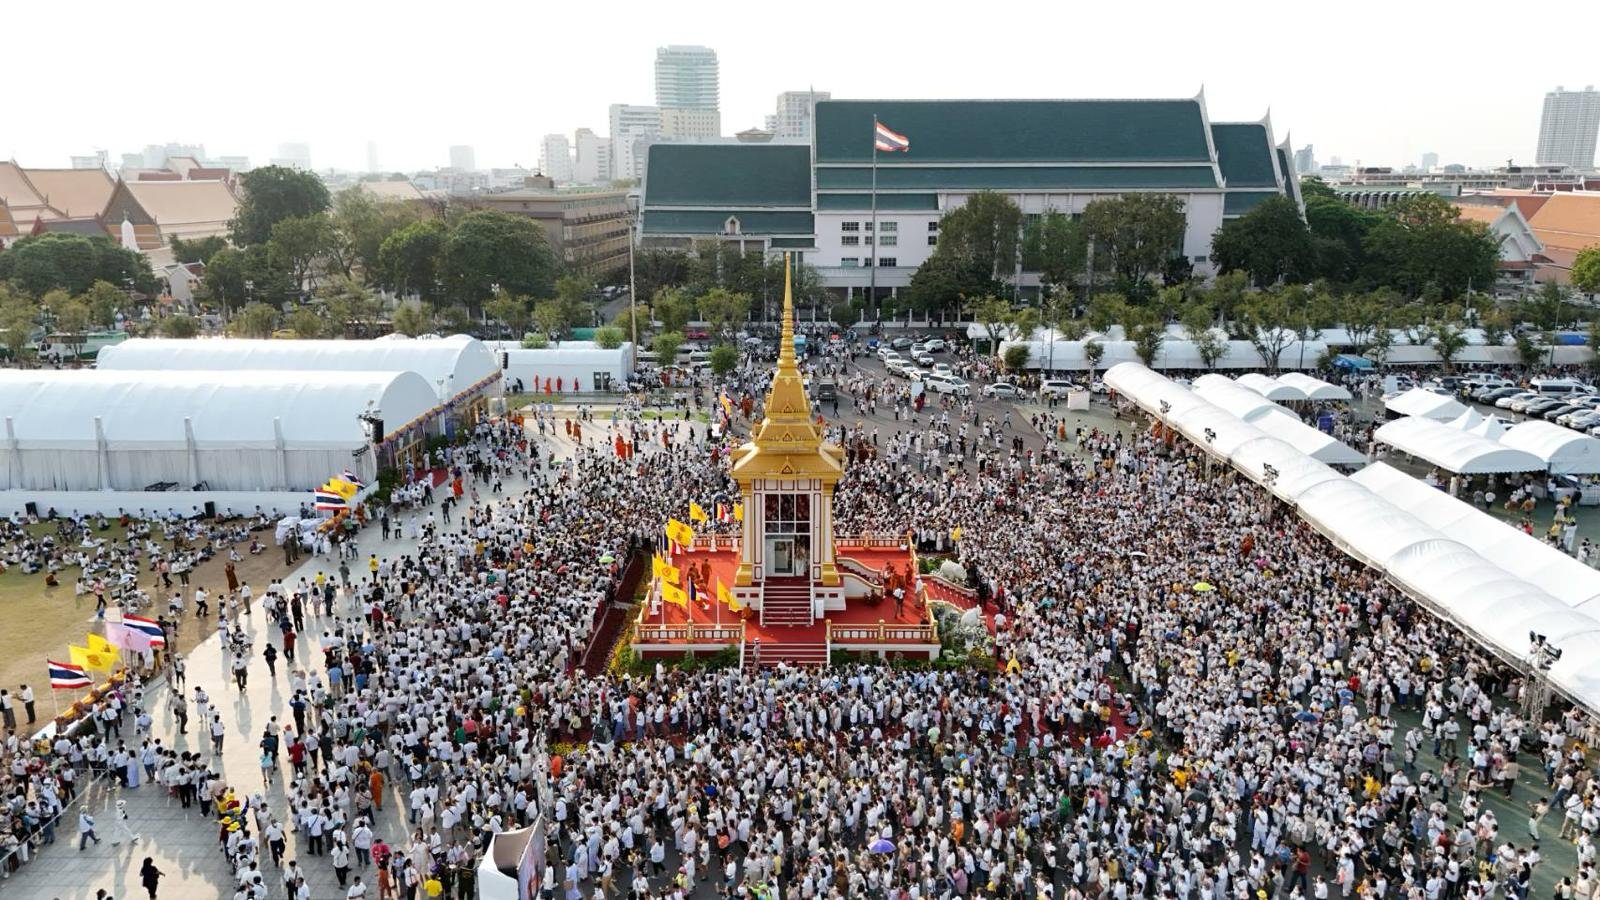 Almost a million devotees in Thailand paid obeisance to the sacred relics of Lord Buddha and his disciples Arahant Sariputta and Arahant Maha Moggallana in Bangkok.